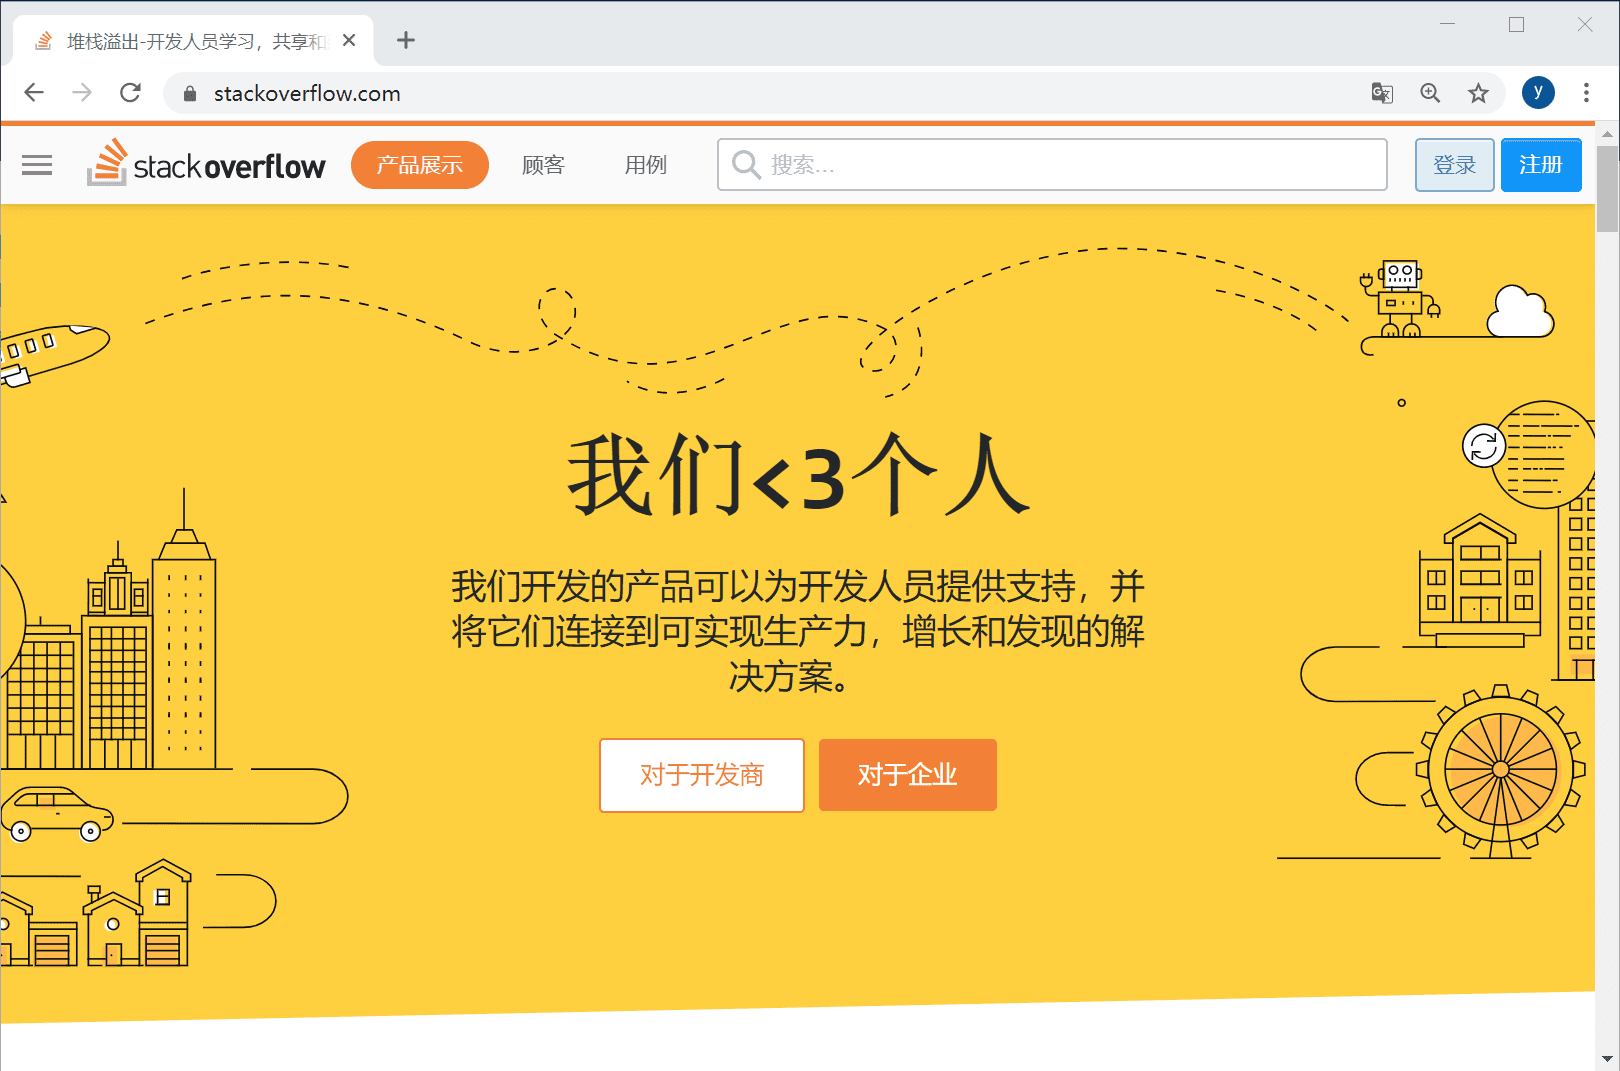 Stack Overflow 技术开发